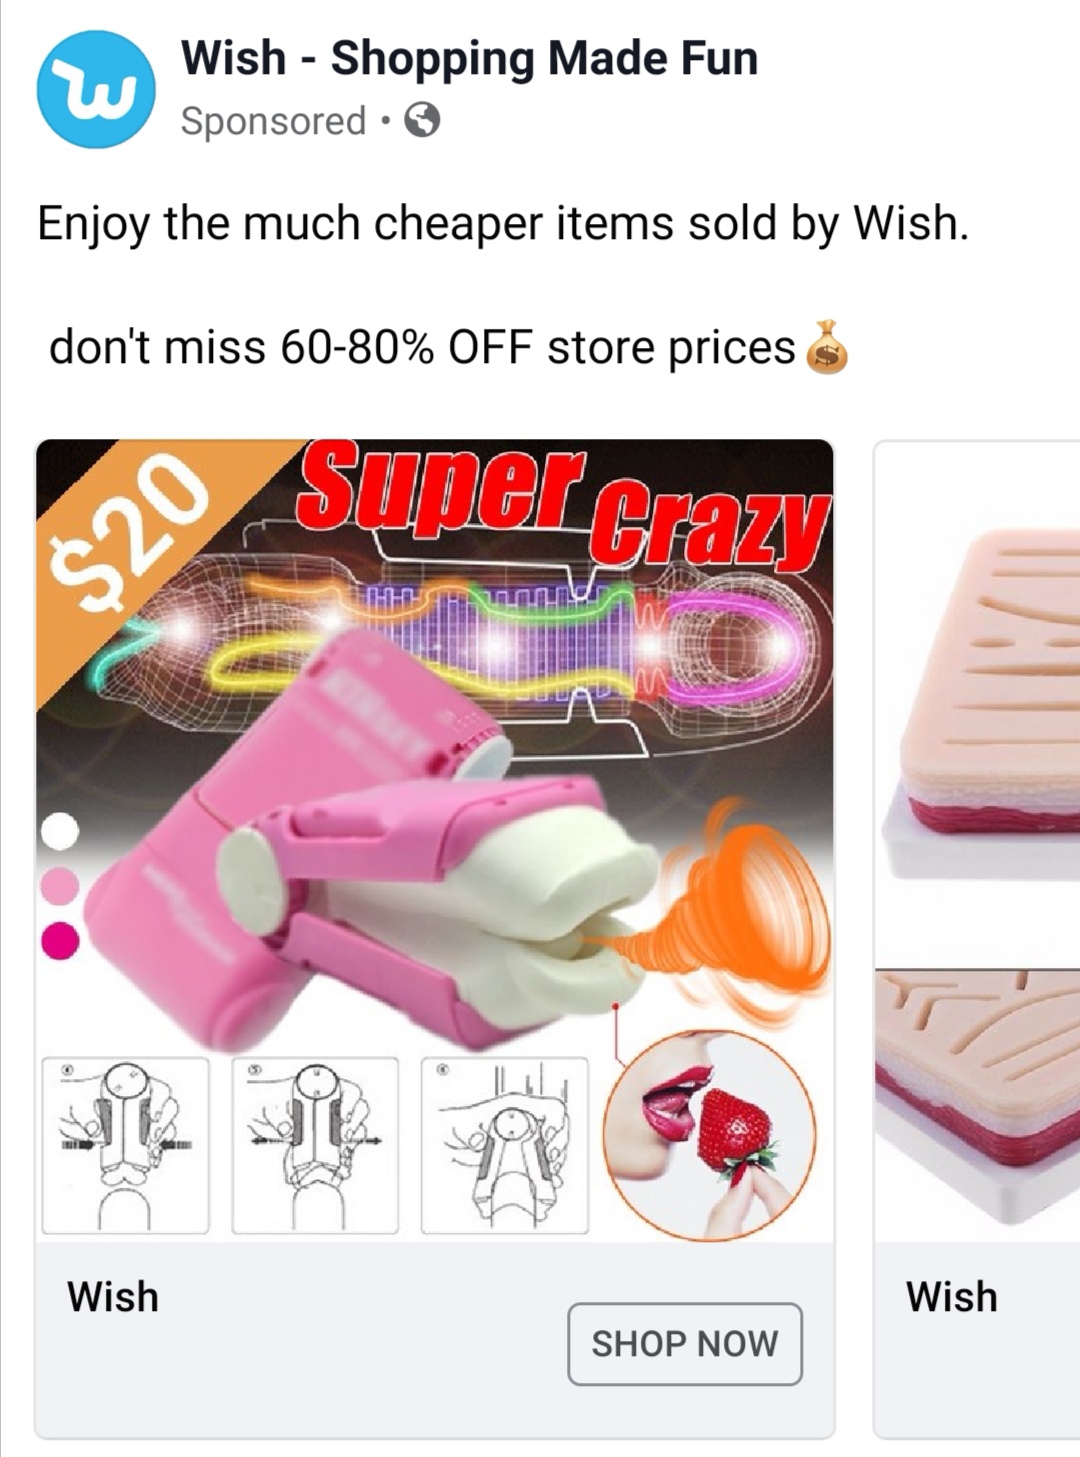 Wish Shopping Made Fun Sponsored Enjoy the much cheaper items sold by Wish. don't miss 6080% Off store prices $ La super crazy Wish Wish Shop Now